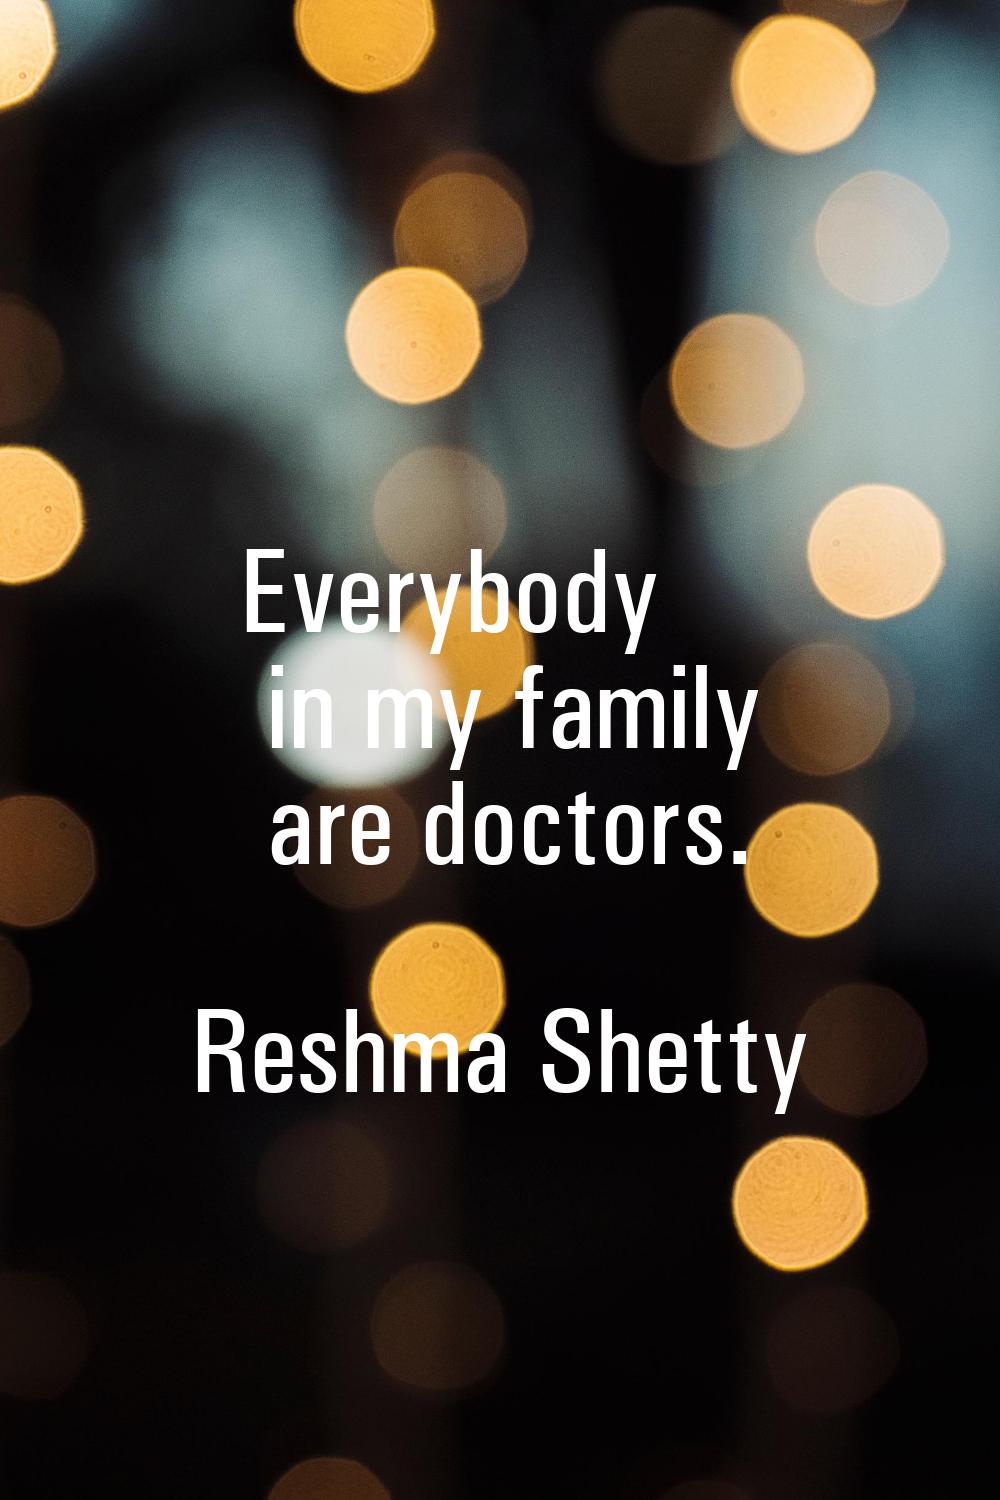 Everybody in my family are doctors.